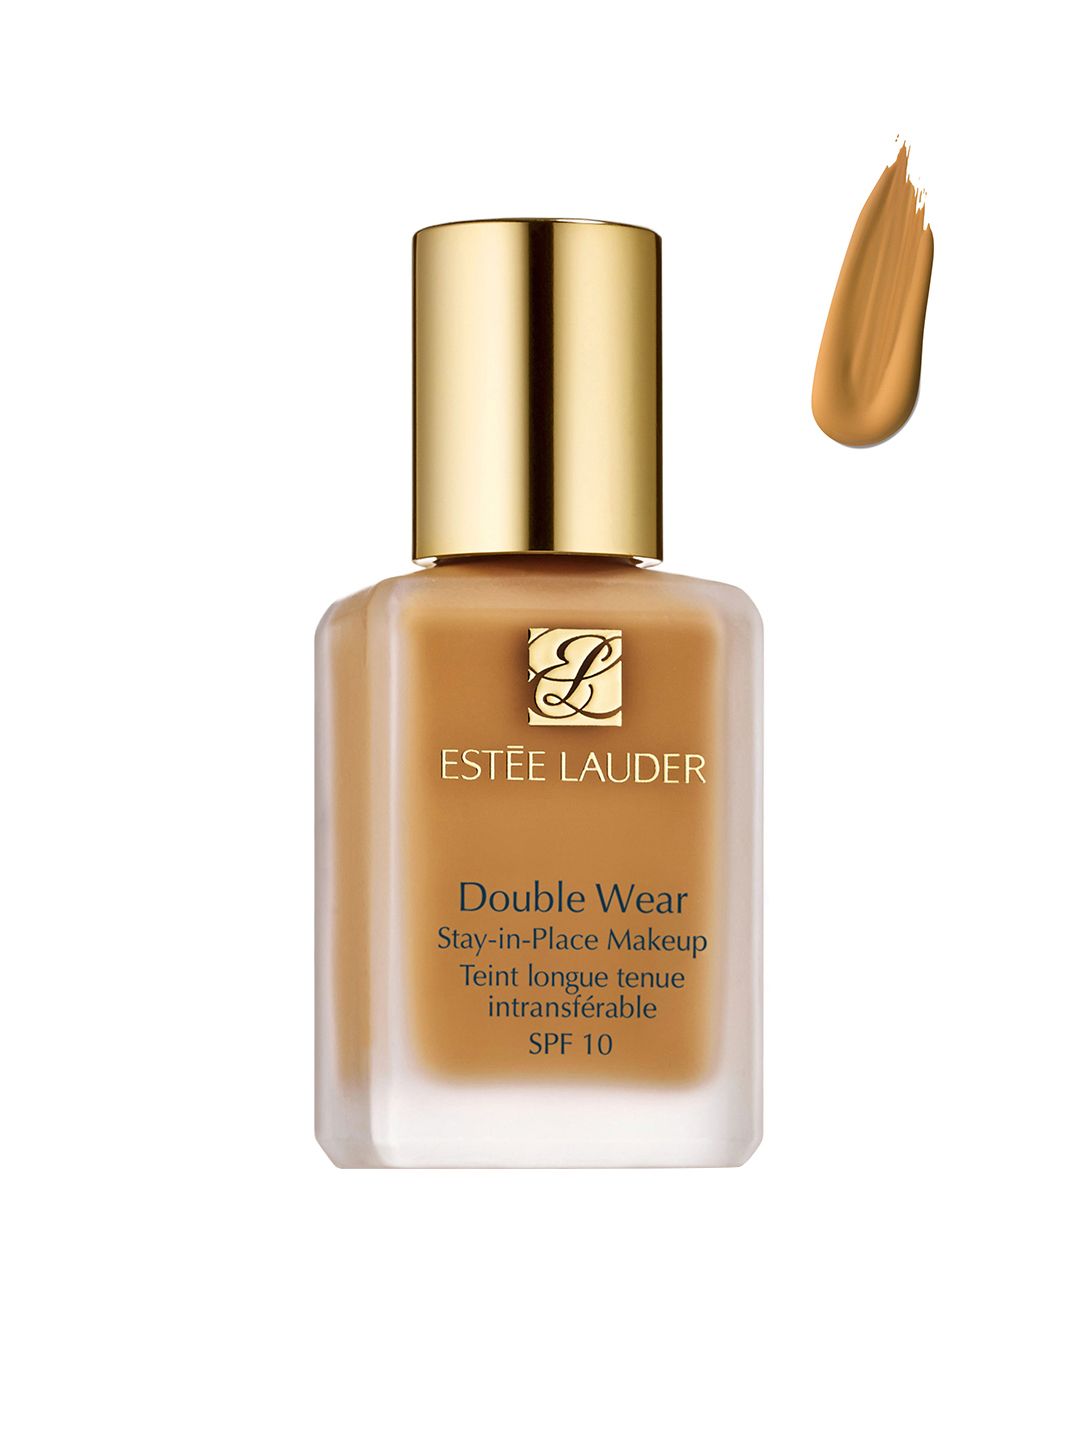 Estee Lauder Double Wear Stay-in-Place Makeup SPF 10 Foundation - Honey Bronze 30 ml Price in India